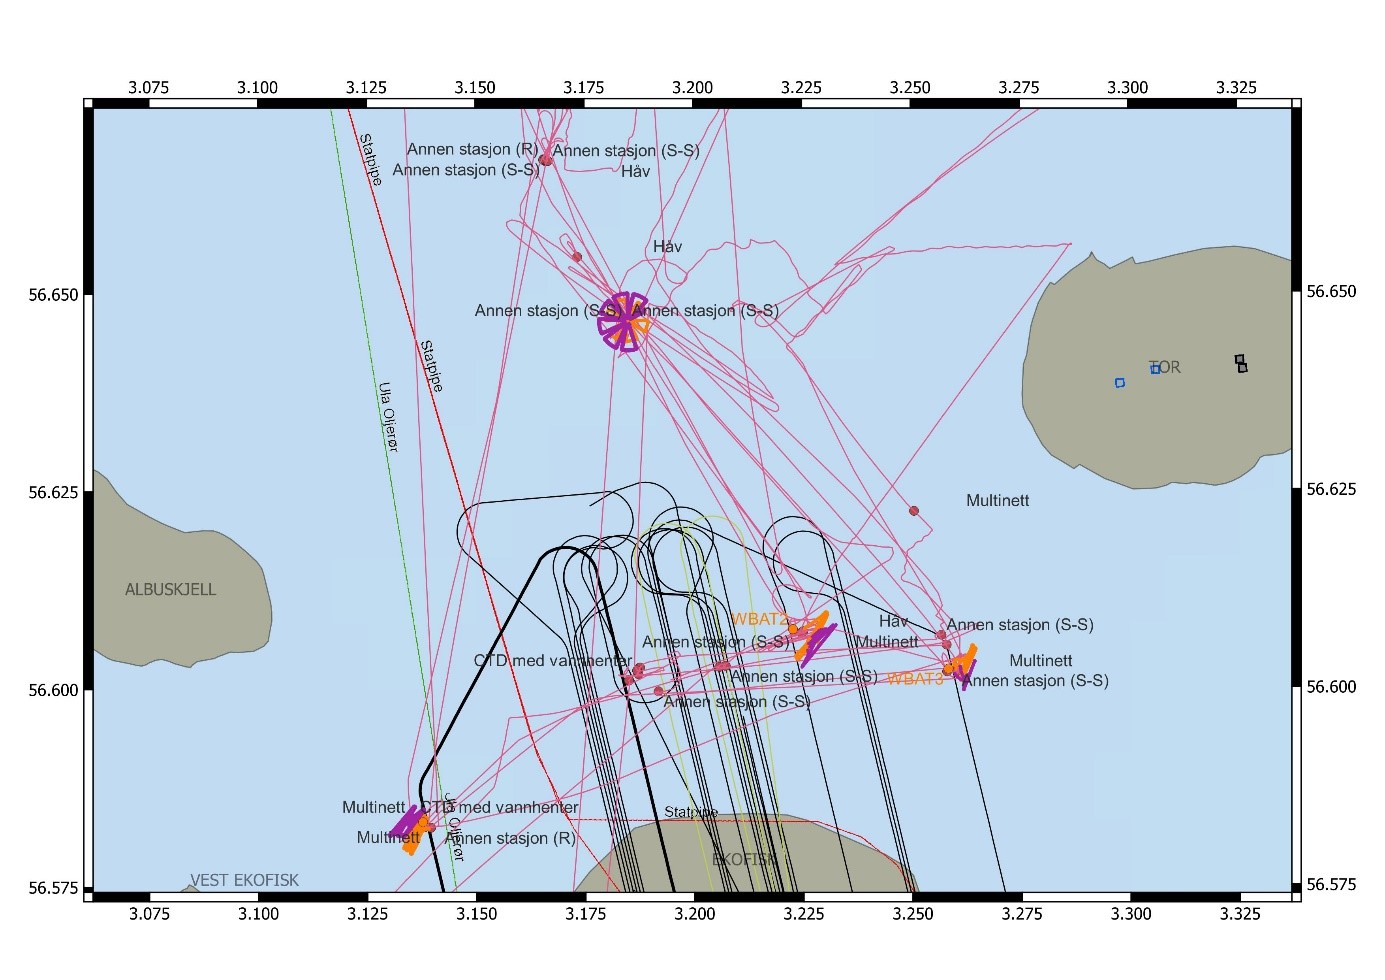 Figure shows the GPS tracks of the RV Kristine Bonnevie, the otter and the kayak during the field work at Ekofisk. The tracks are shown as lines on a map of northern Ekofisk. 